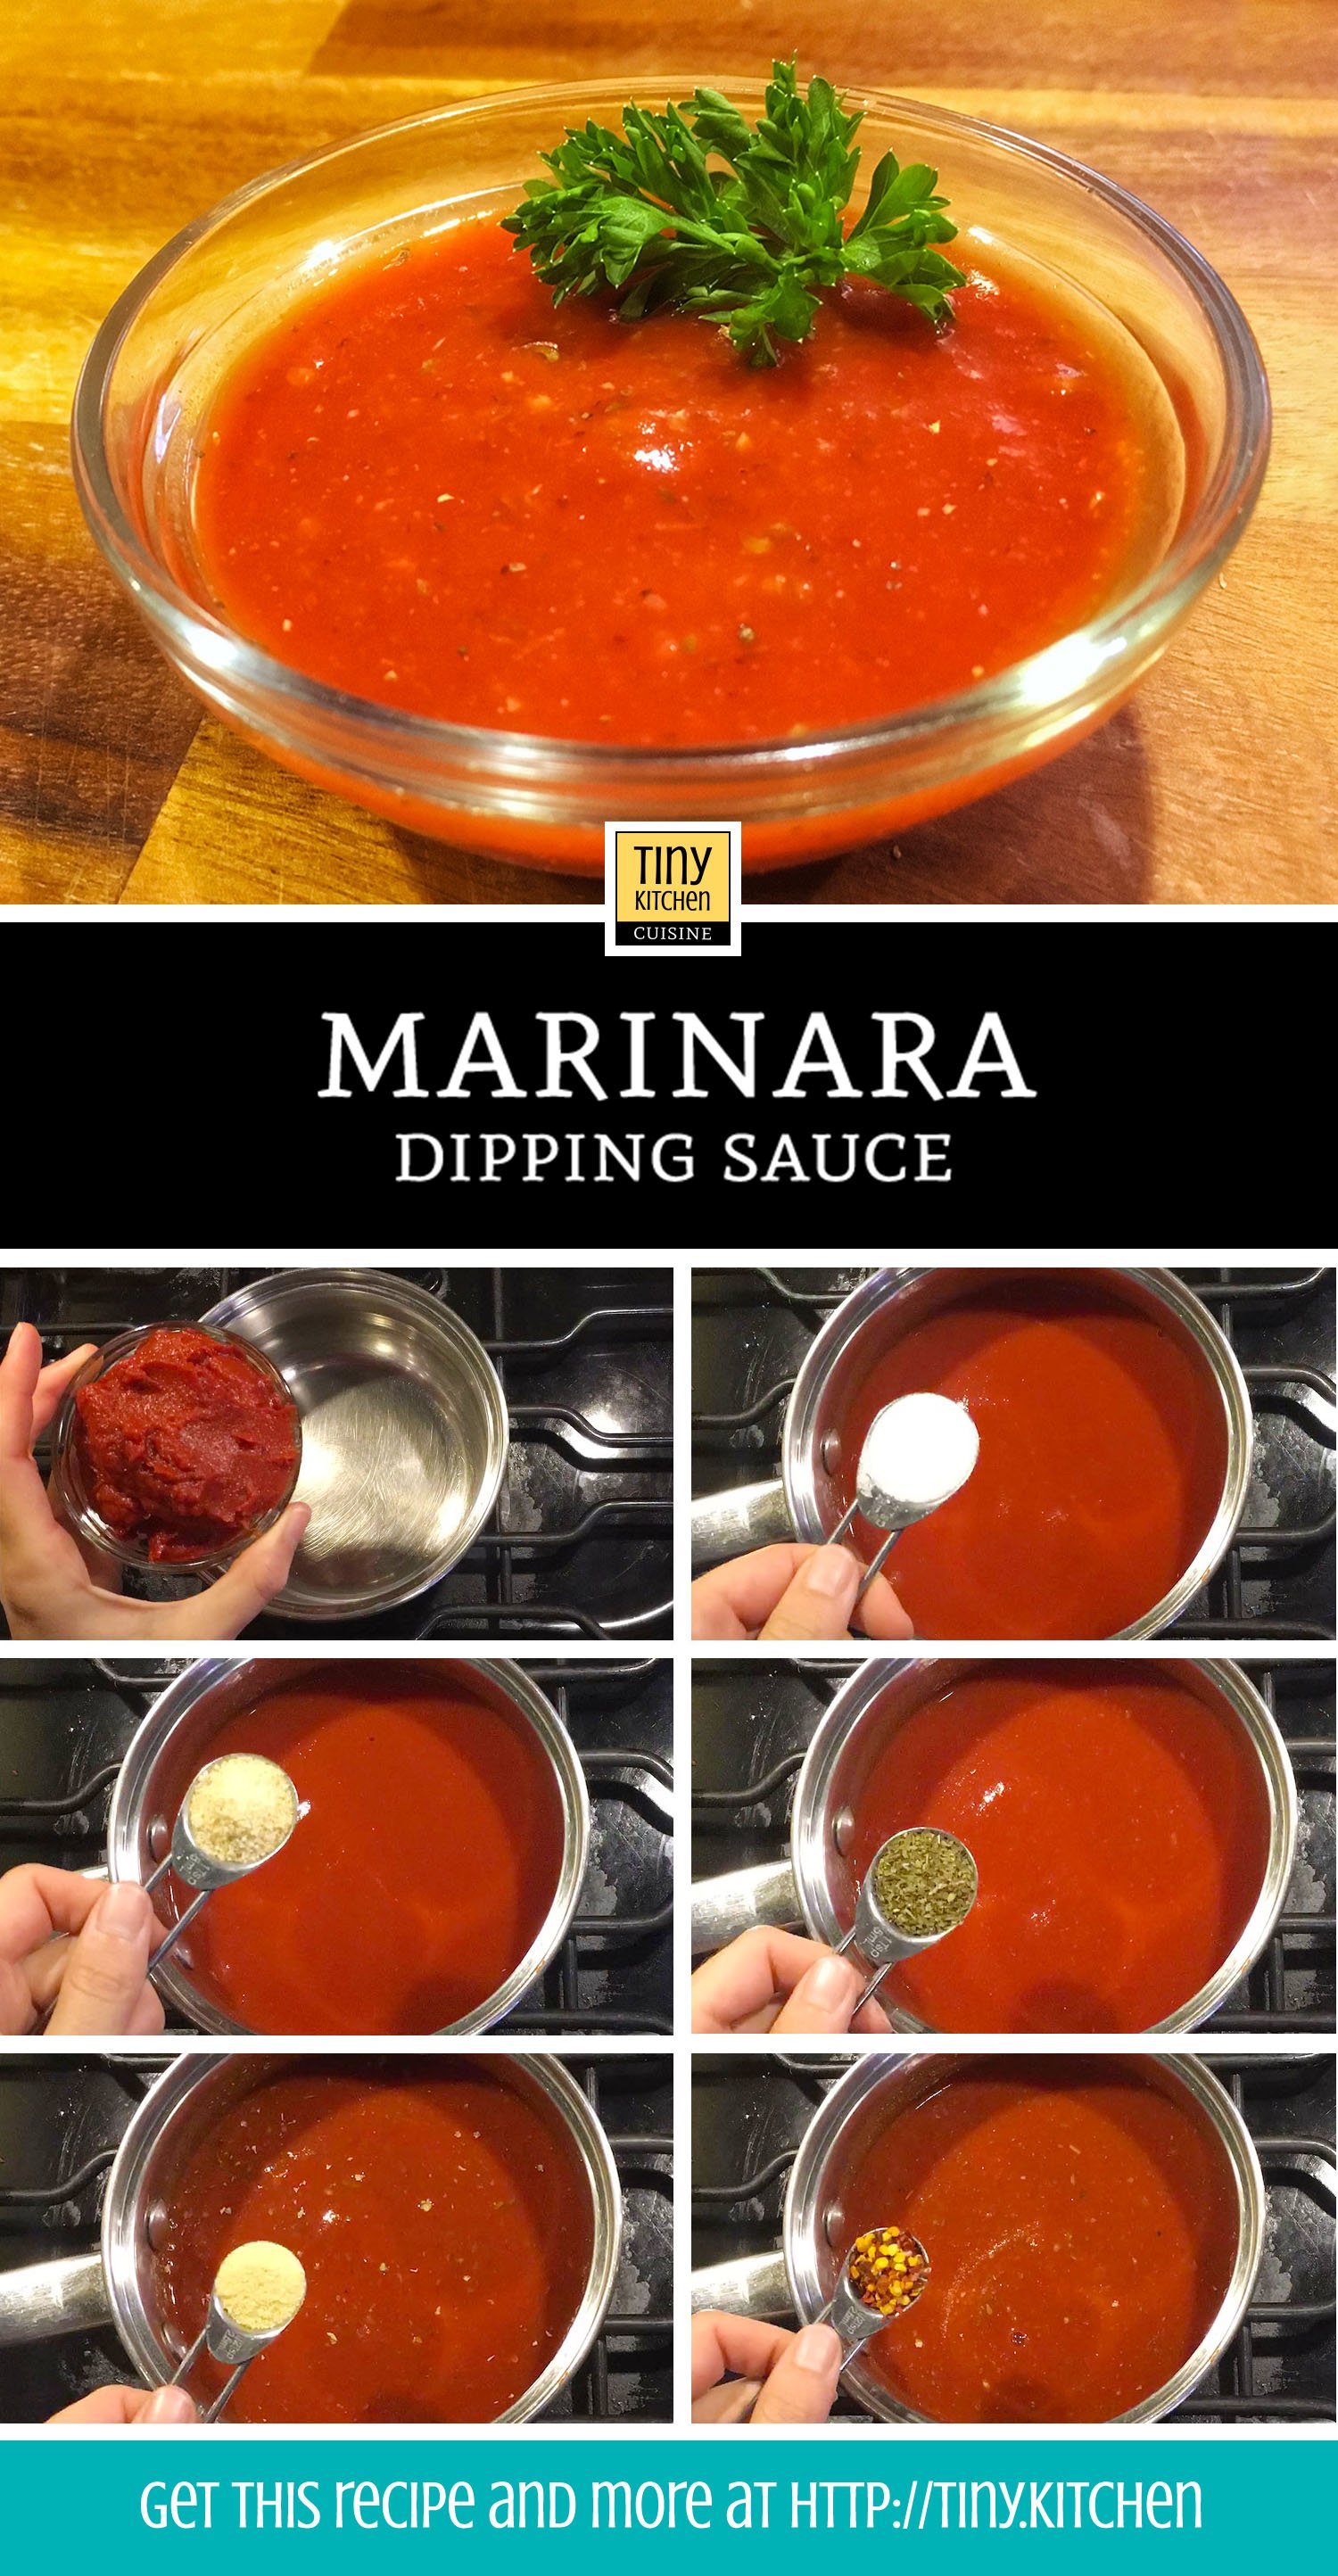 Want the perfect sauce to dip your favorite fried italian snacks in? Make this easy recipe using common pantry items to make marinara sauce in just minutes! | Tiny Kitchen Cuisine | https://tiny.kitchen